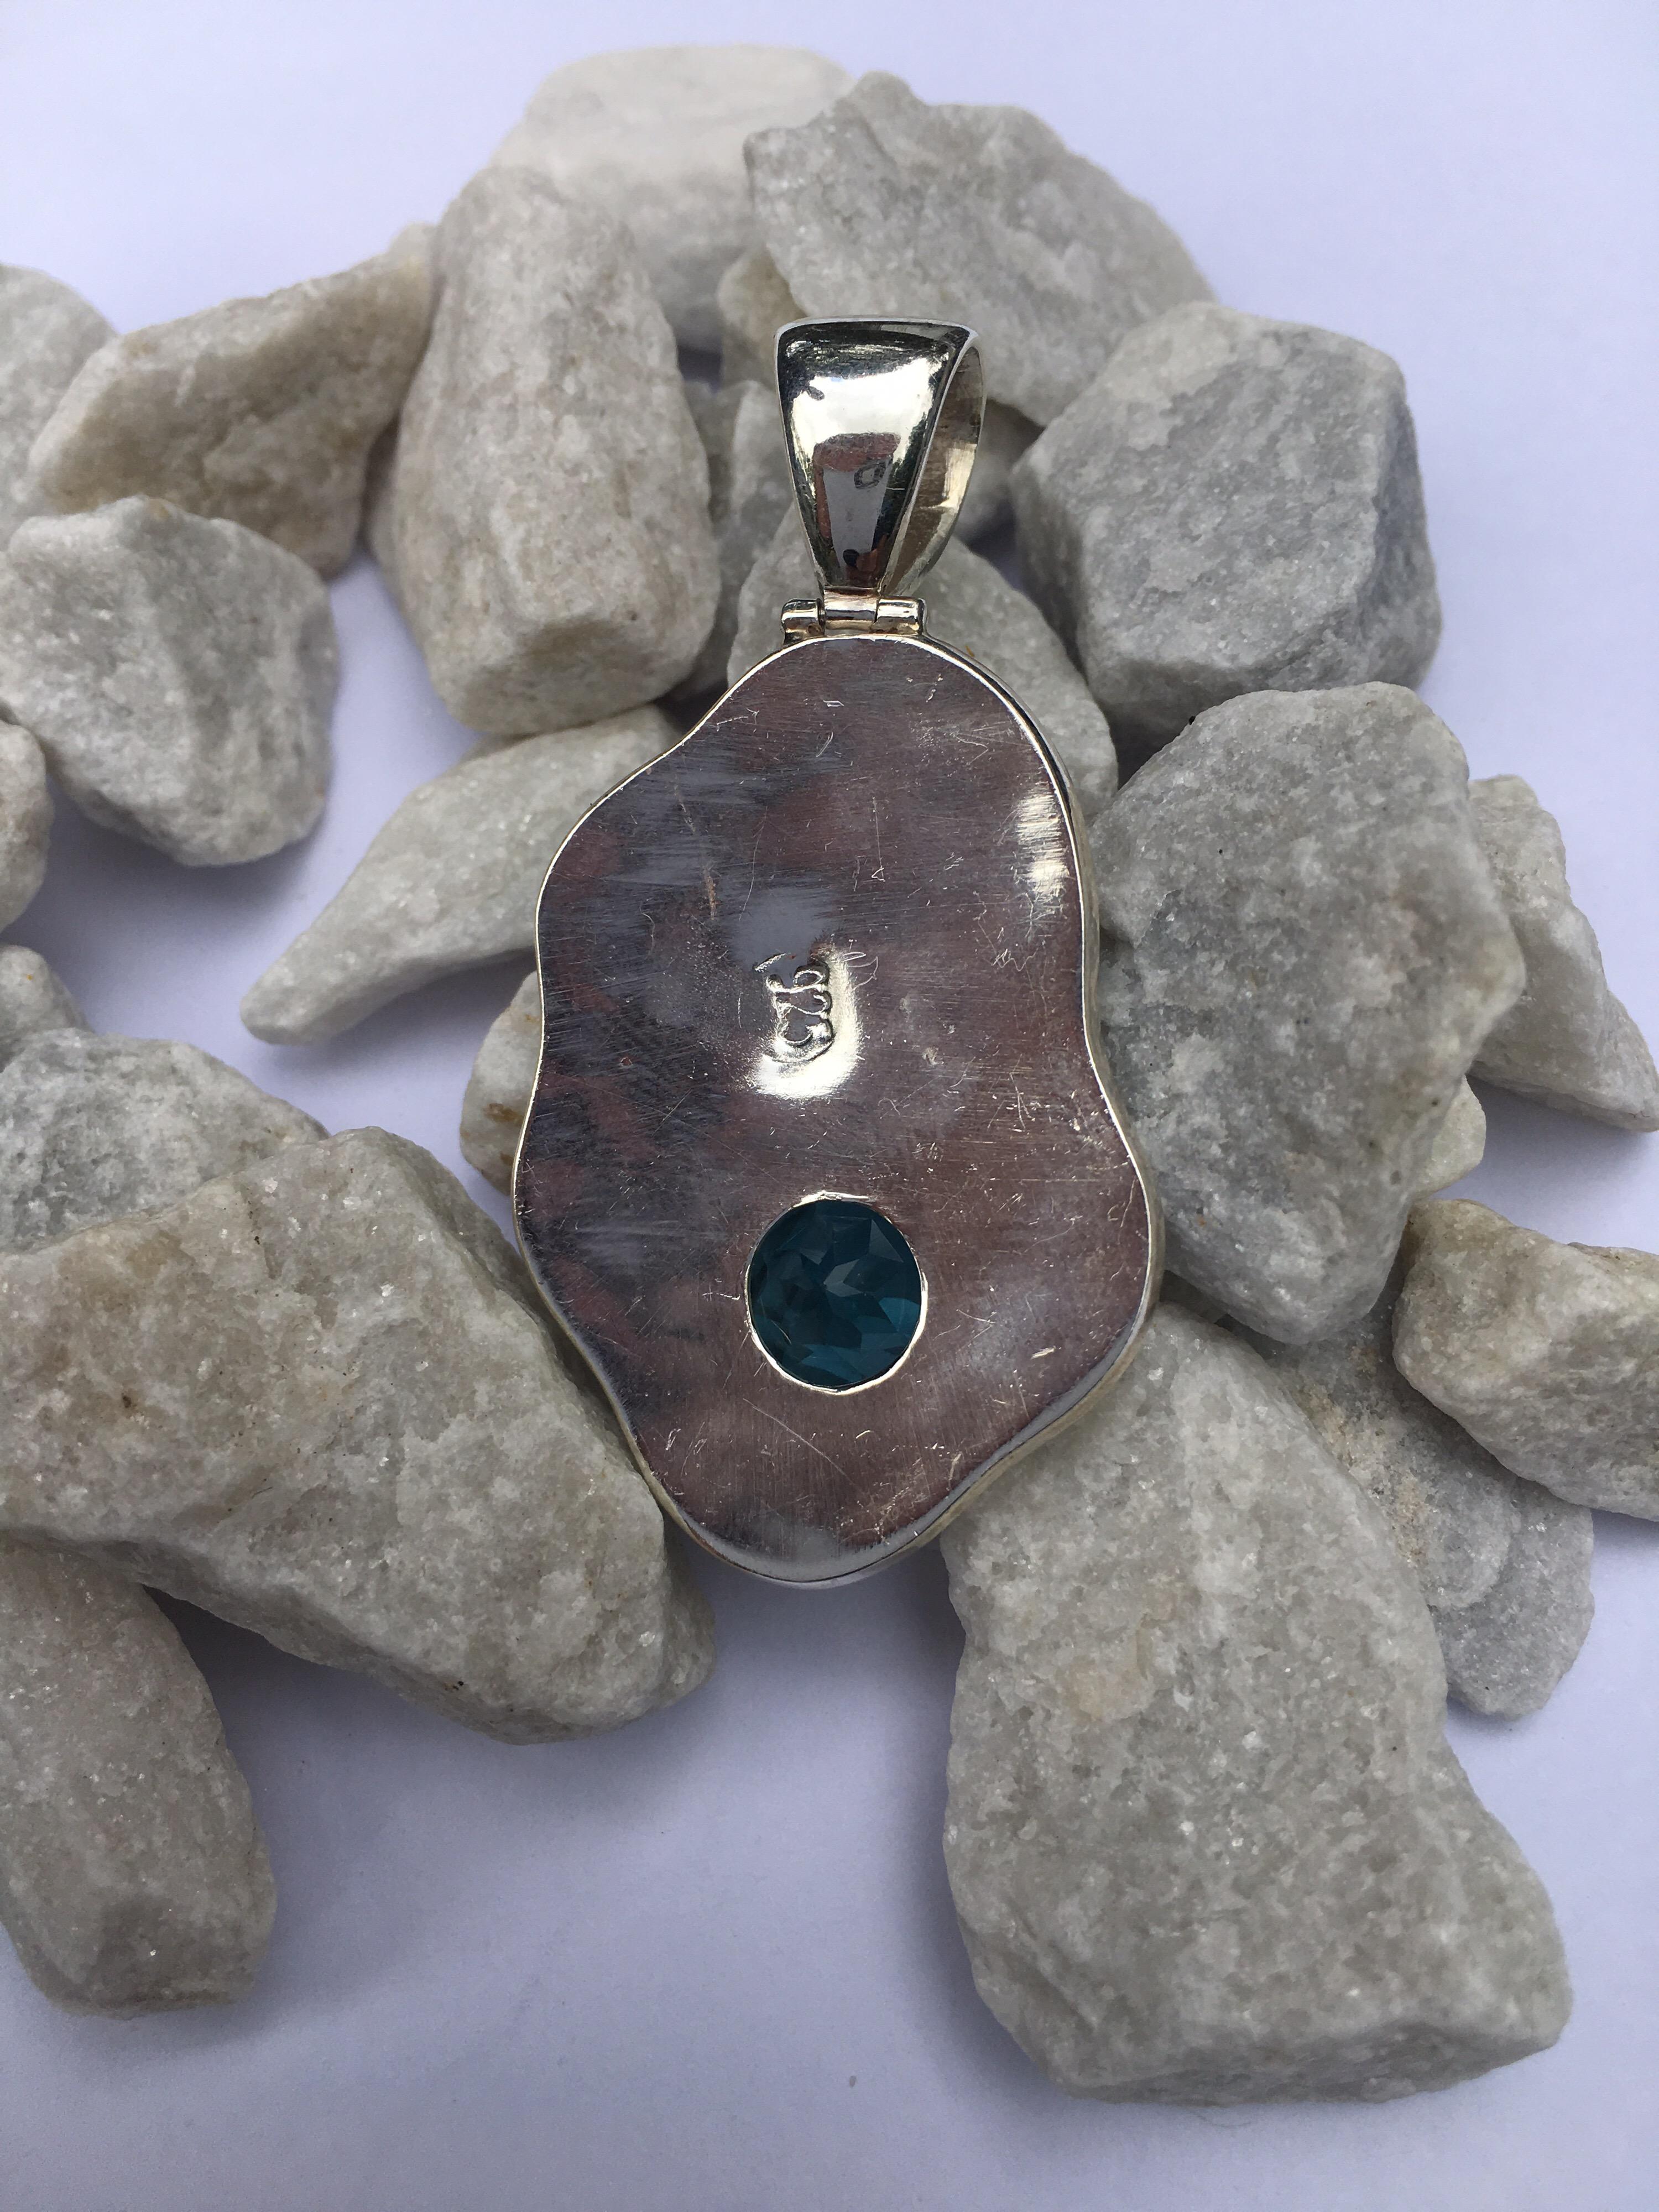 Round 11 MM Blue Topaz set in sterling silver is Hand crafted Pendant.
The stone is hand cut and Polished.
Total Weight of the pendant is 9.47 Gram.
One can use this Pendant in silver chain or Leather band,

